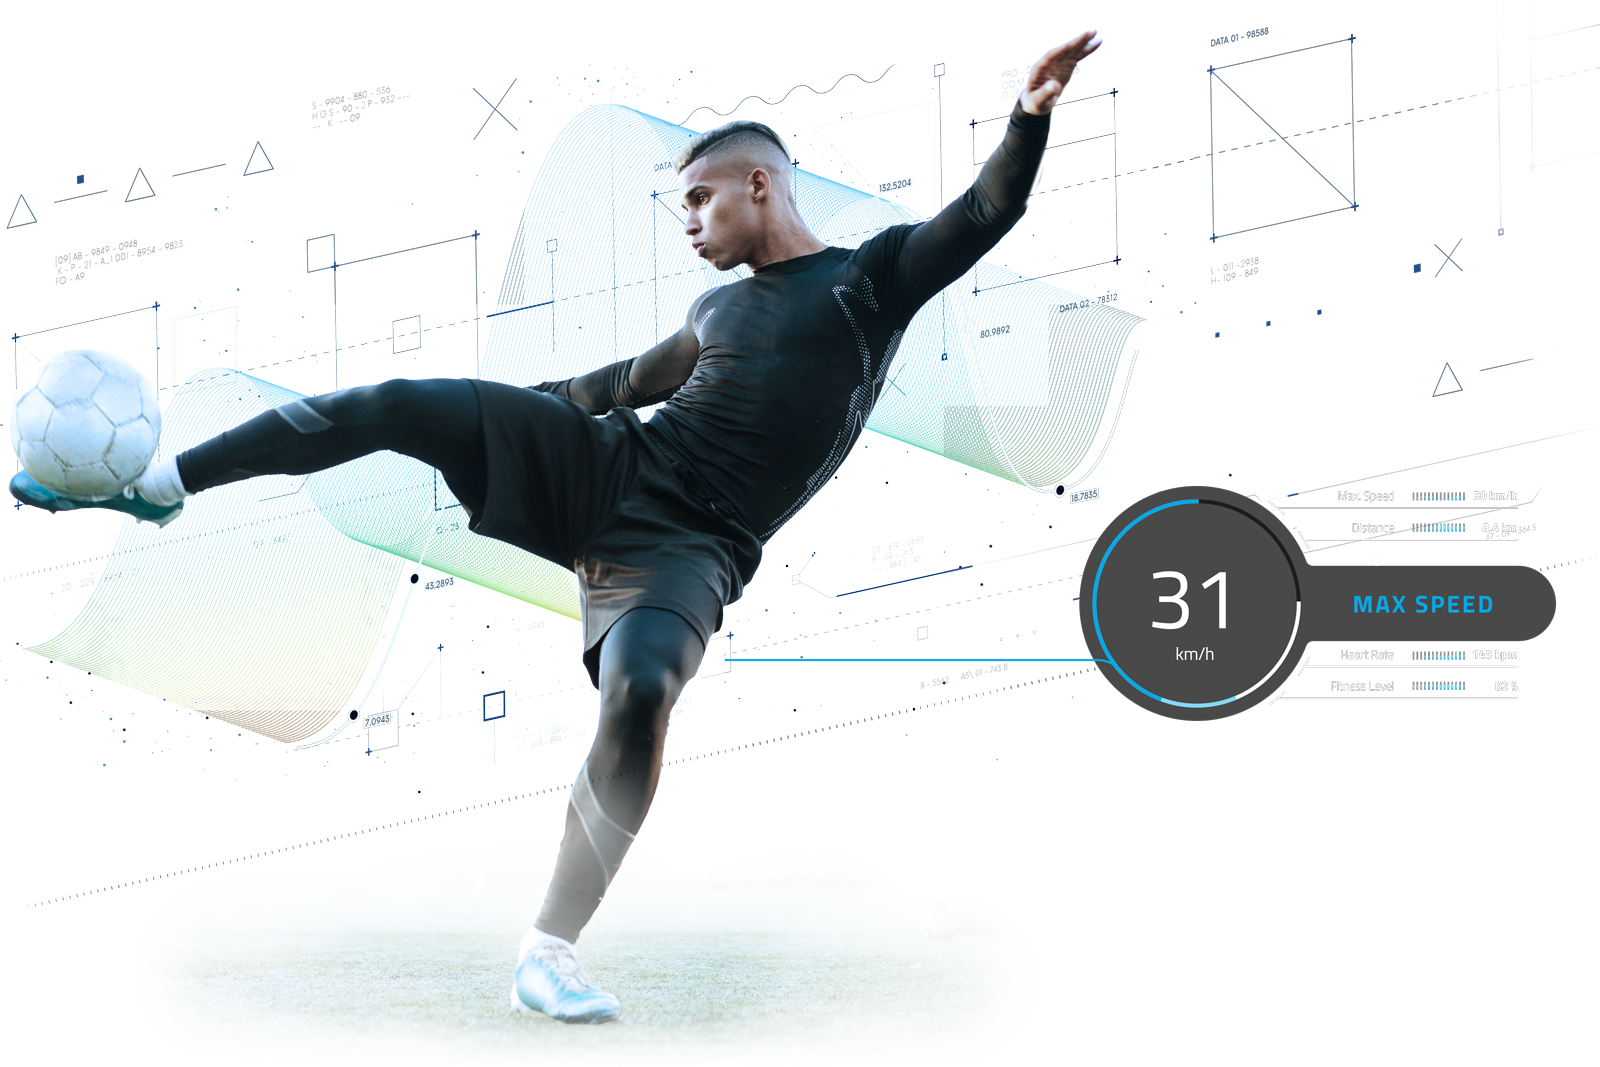 Kinexon Sports Soccer Player with Speed Display